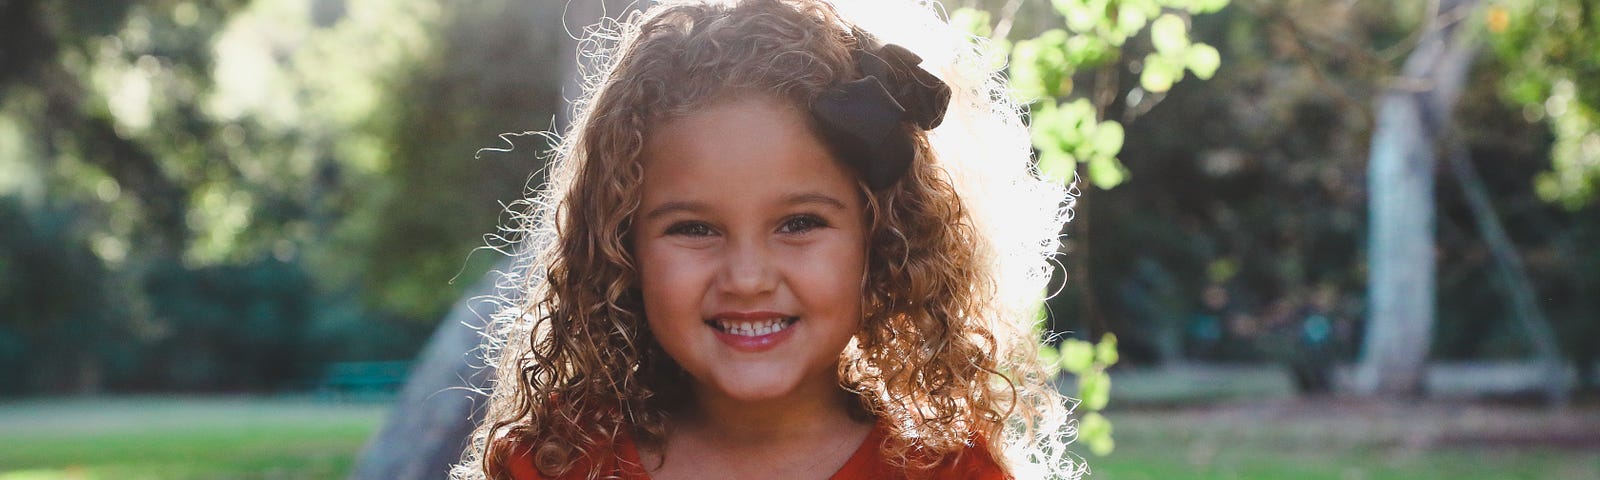 Little girl with long curly hair, wearing a red top, with a big smile.